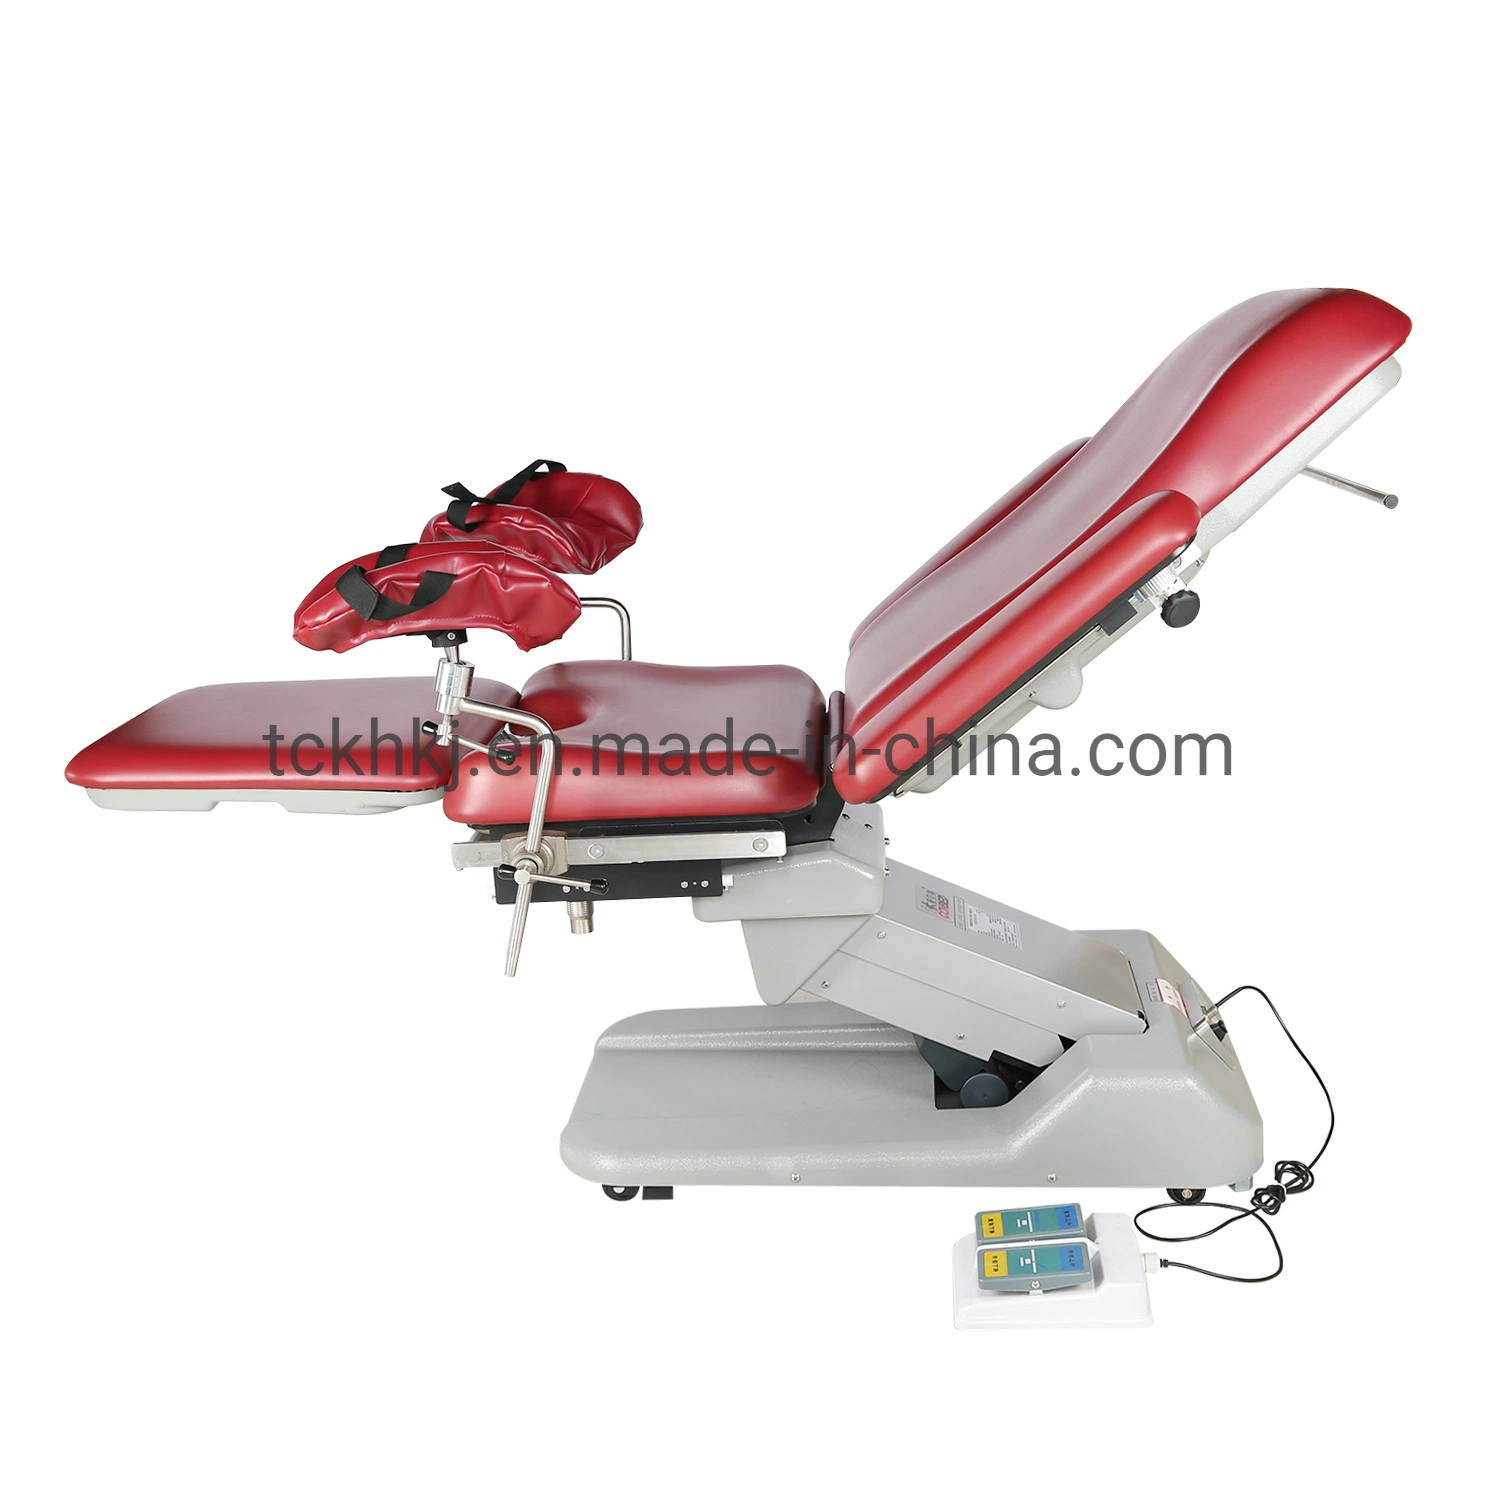 Competitive Price Hospital Medical Product Obstetric Gynecology Operating Chair with Paper Roll